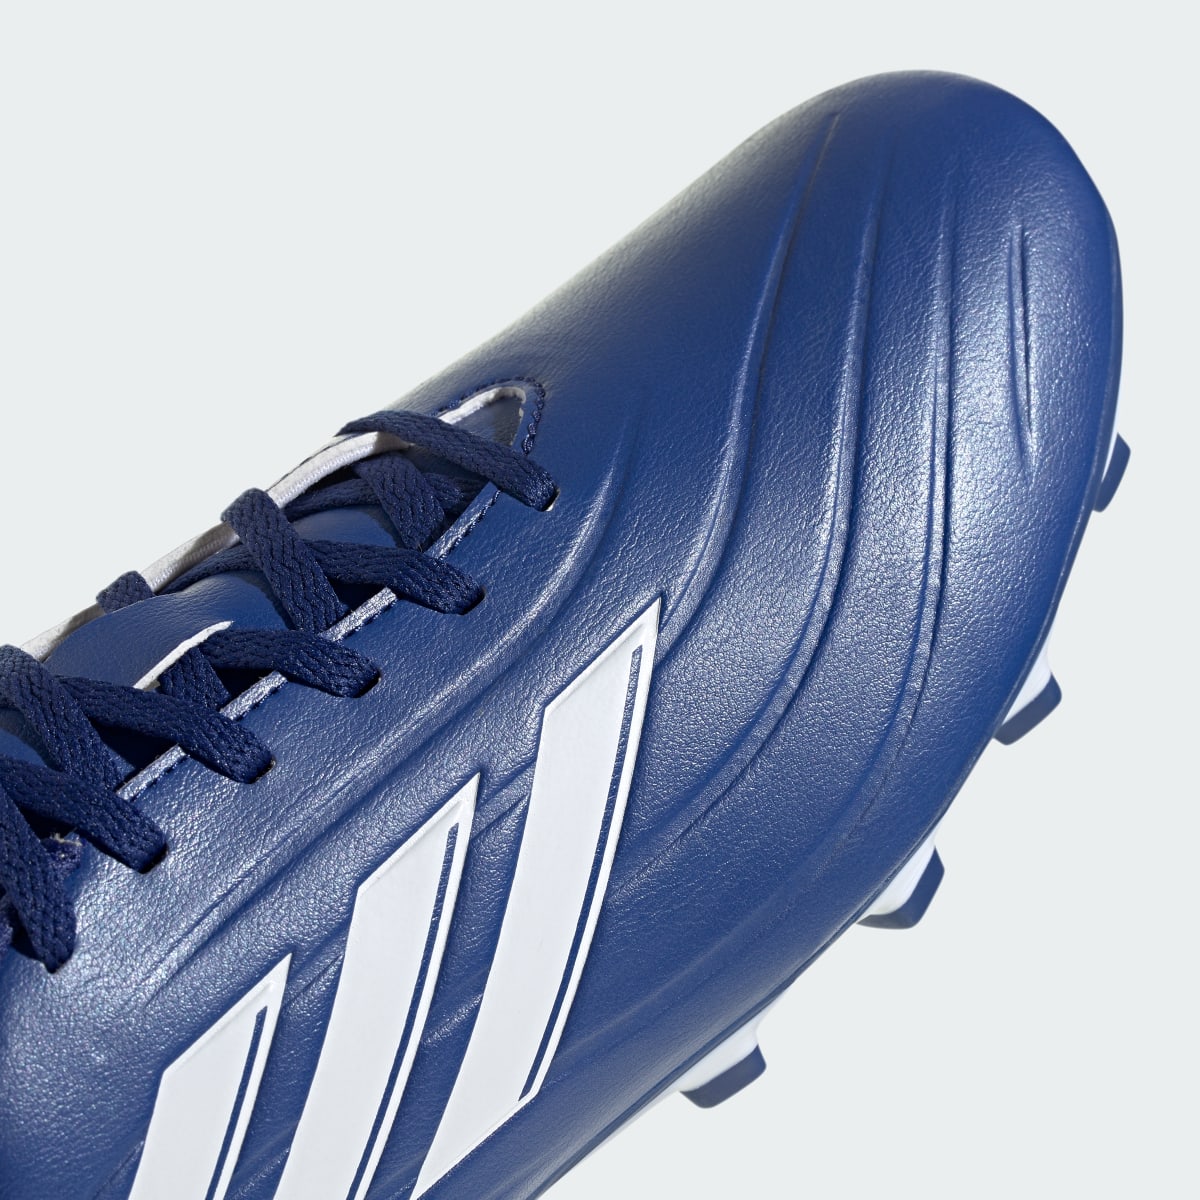 Adidas Copa Pure II.4 Flexible Ground Boots. 10